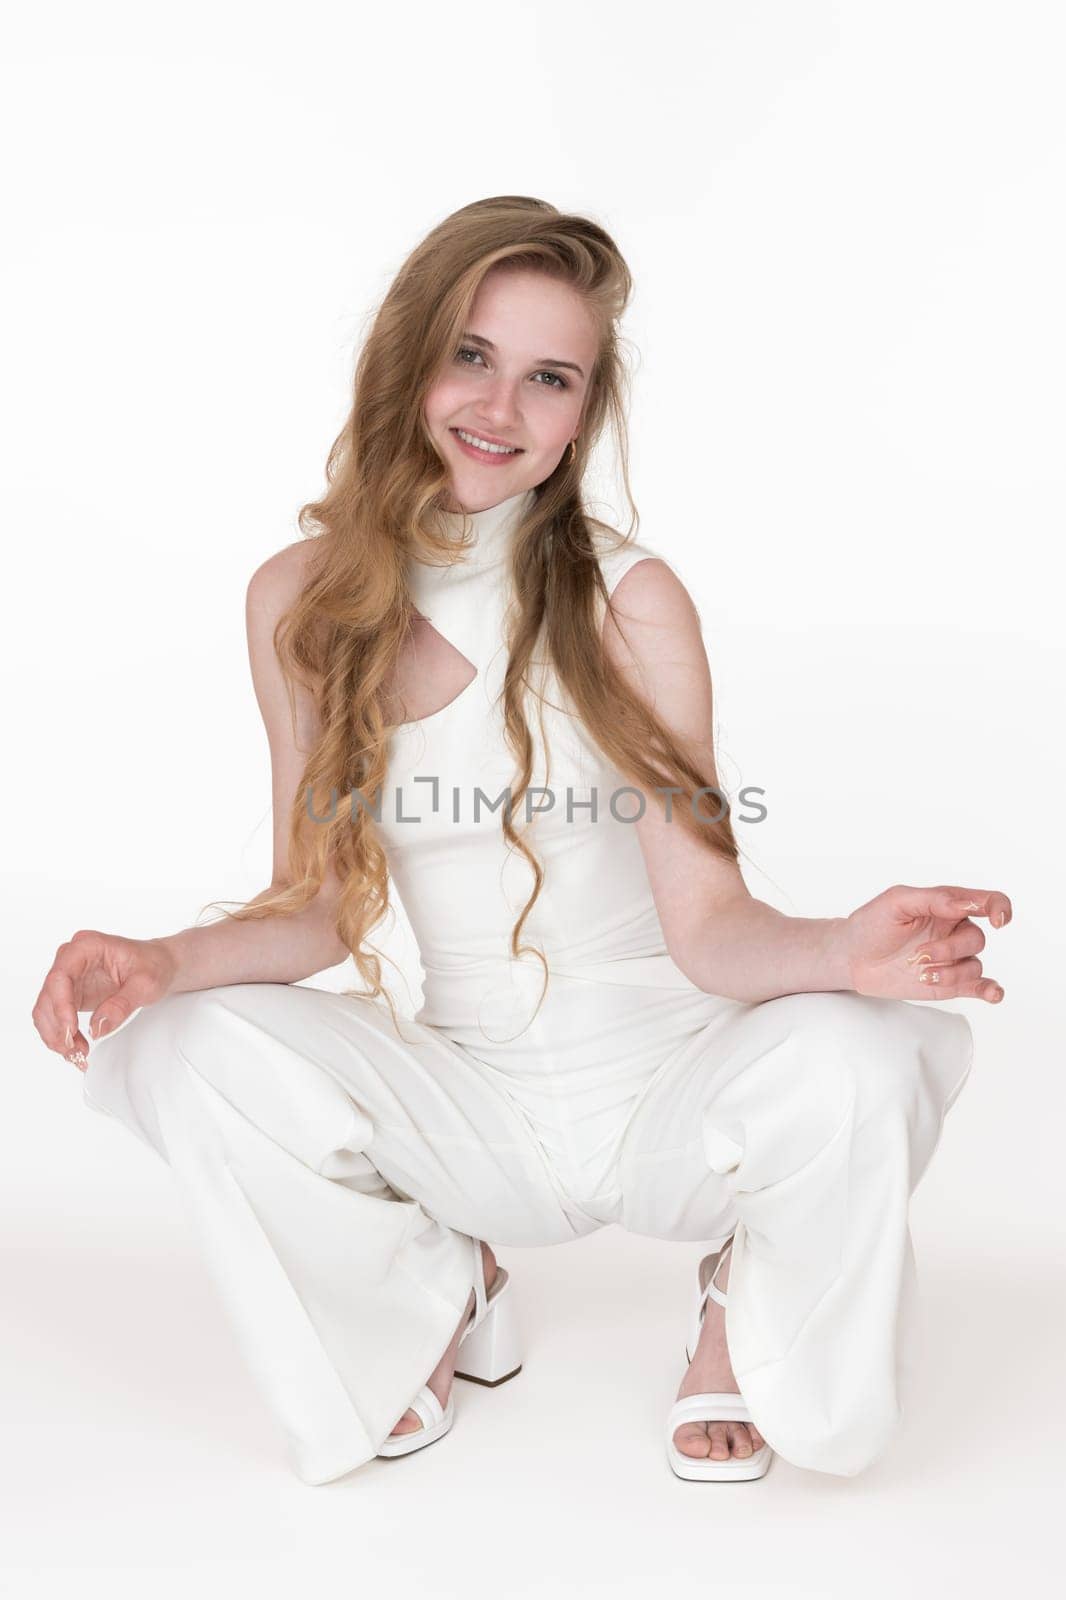 Beautiful blonde woman dressed in white jumpsuit and slingbacks sitting squatting position put hands on knees and looking at camera. Sexy model with long wavy hair. Studio shot on white background